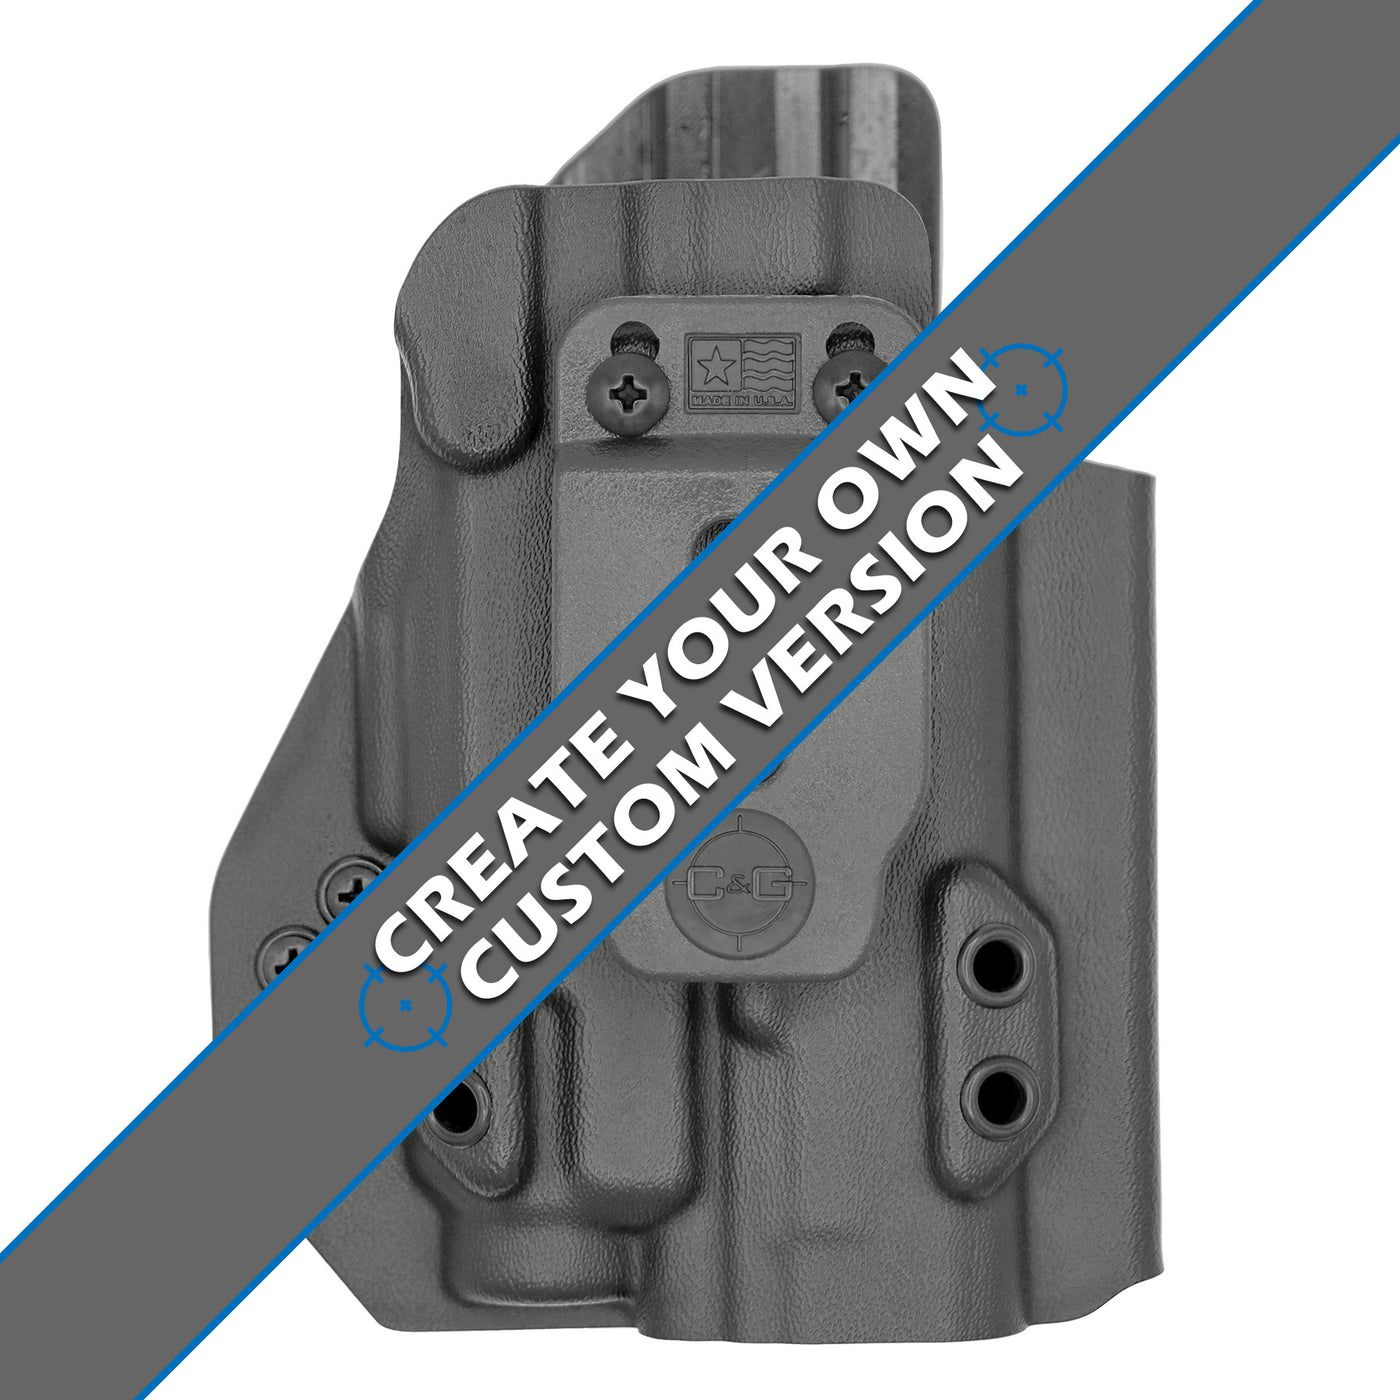 C&G Holsters custom IWB Tactical Walther pdp streamlight TLR7/a